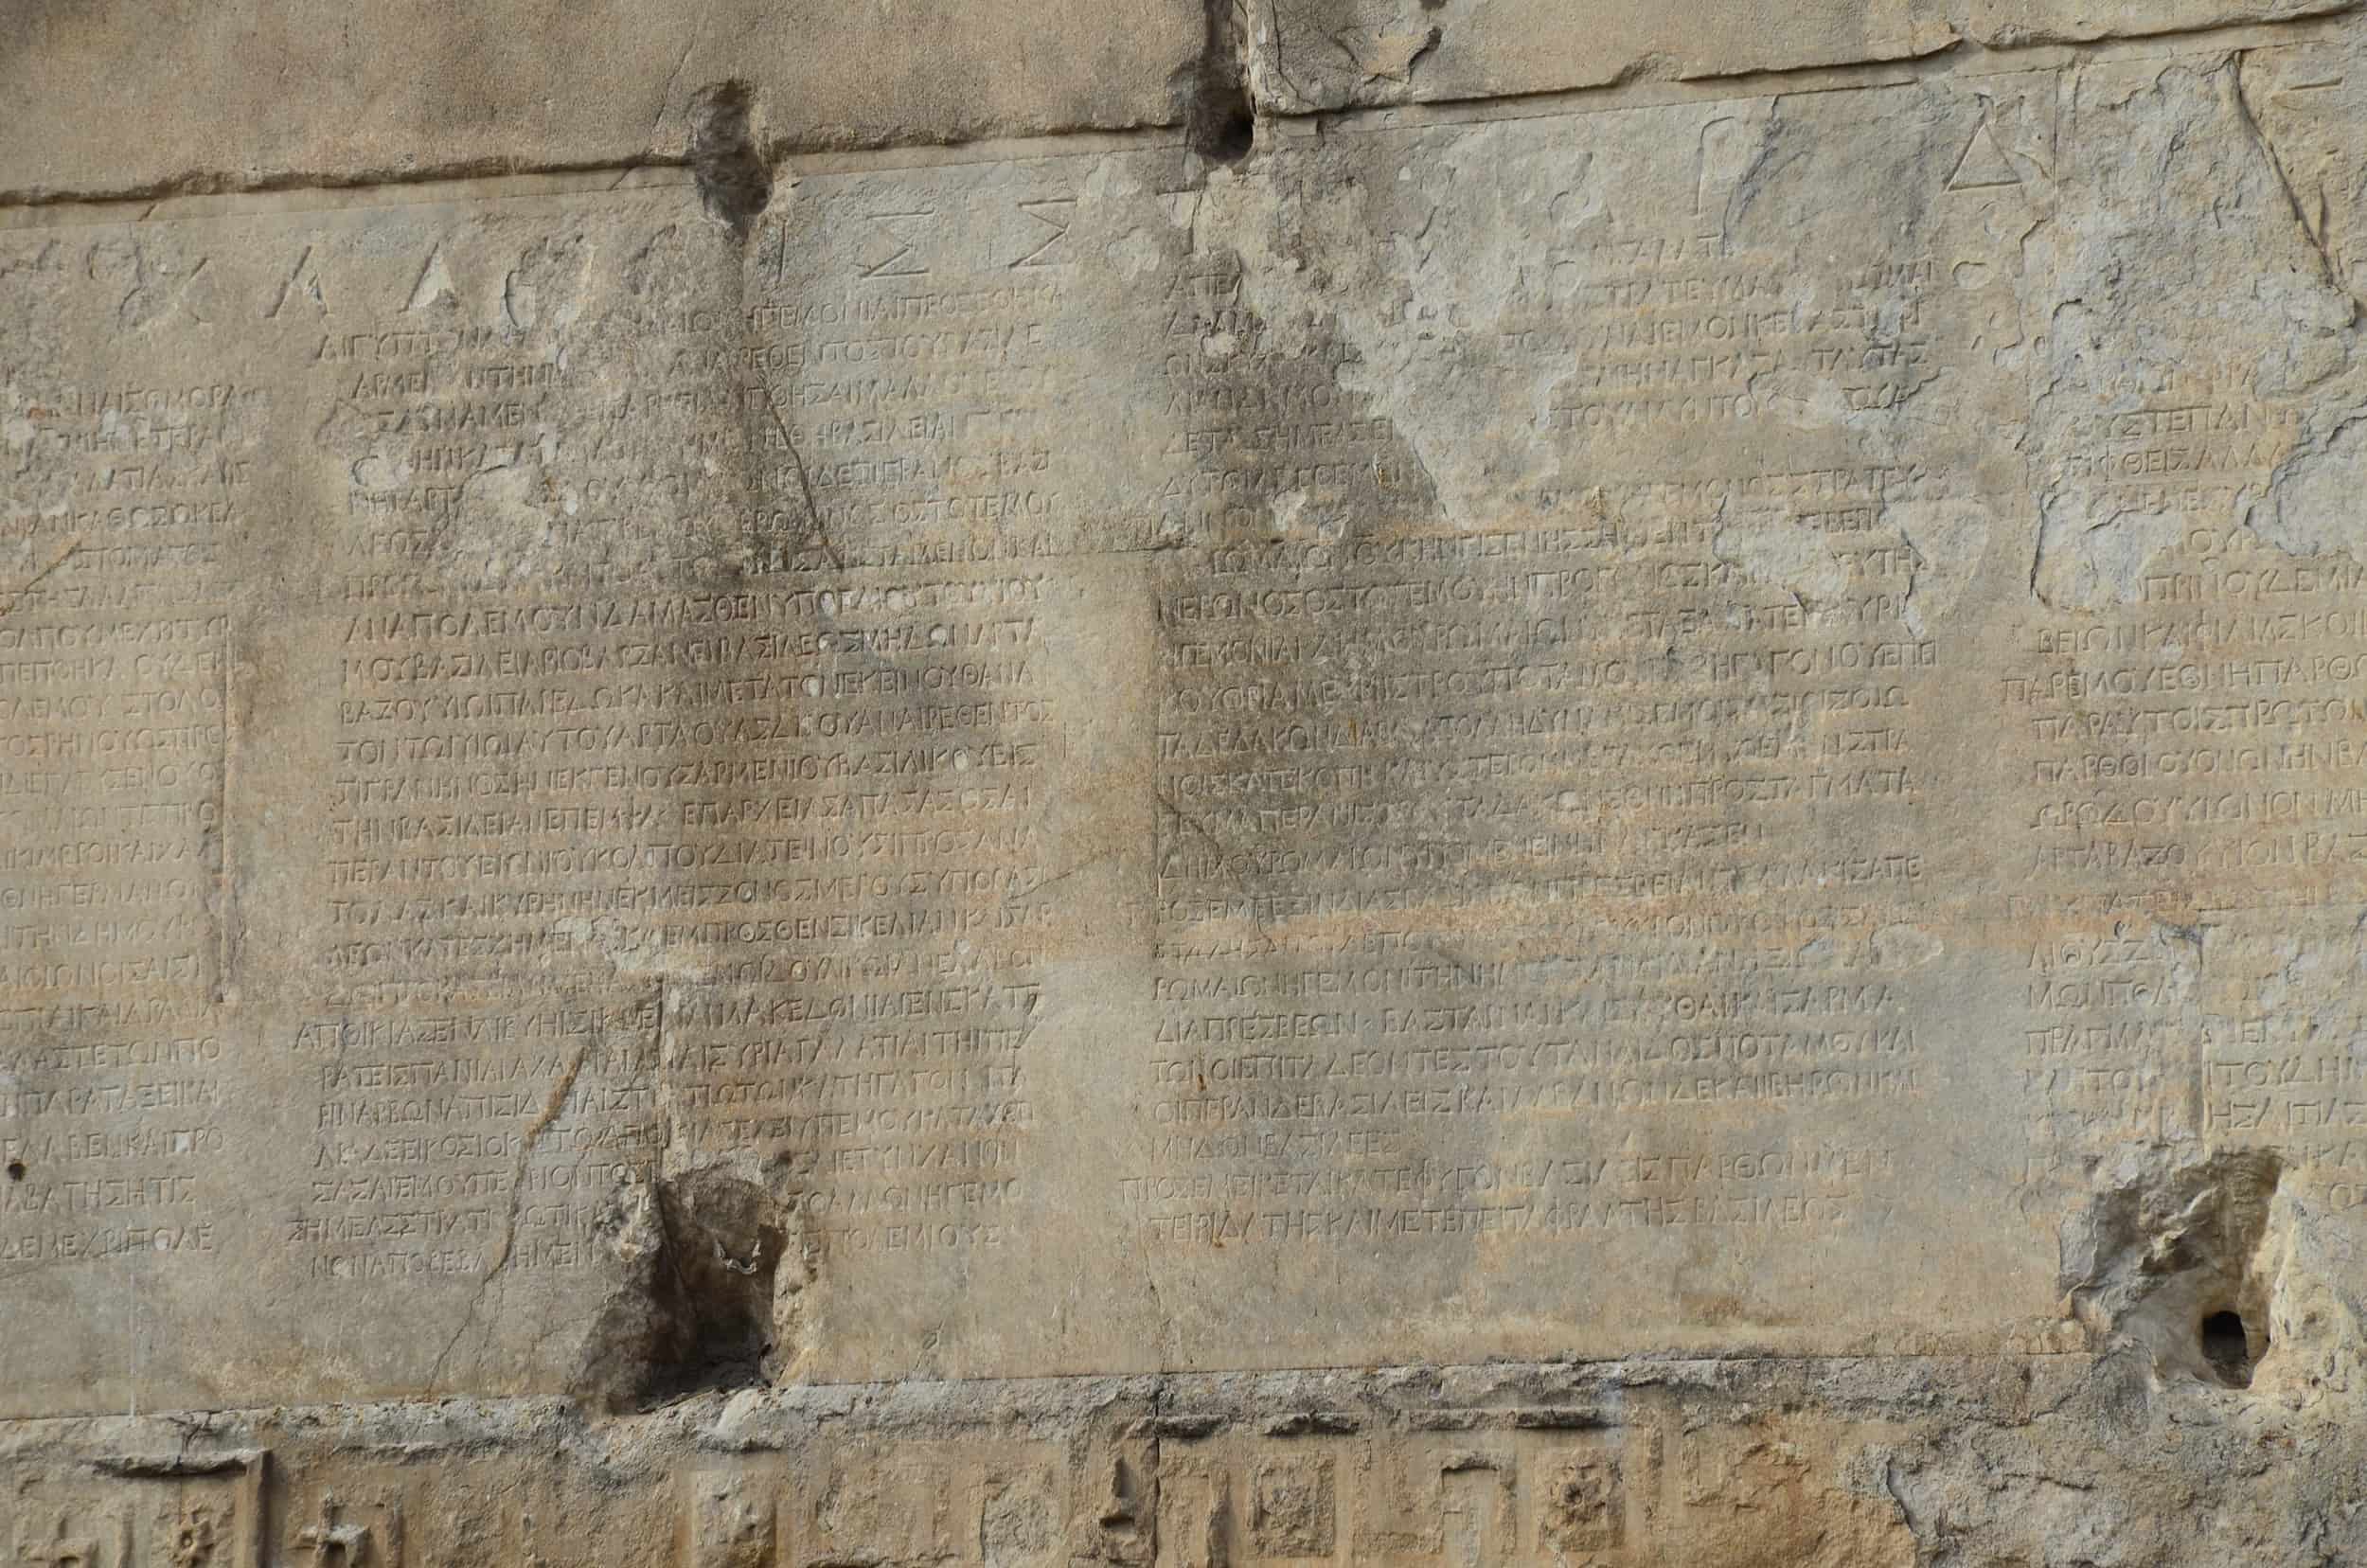 Greek inscription of the Res Gestae Divi Augusti on the Temple of Augustus in Ankara, Turkey